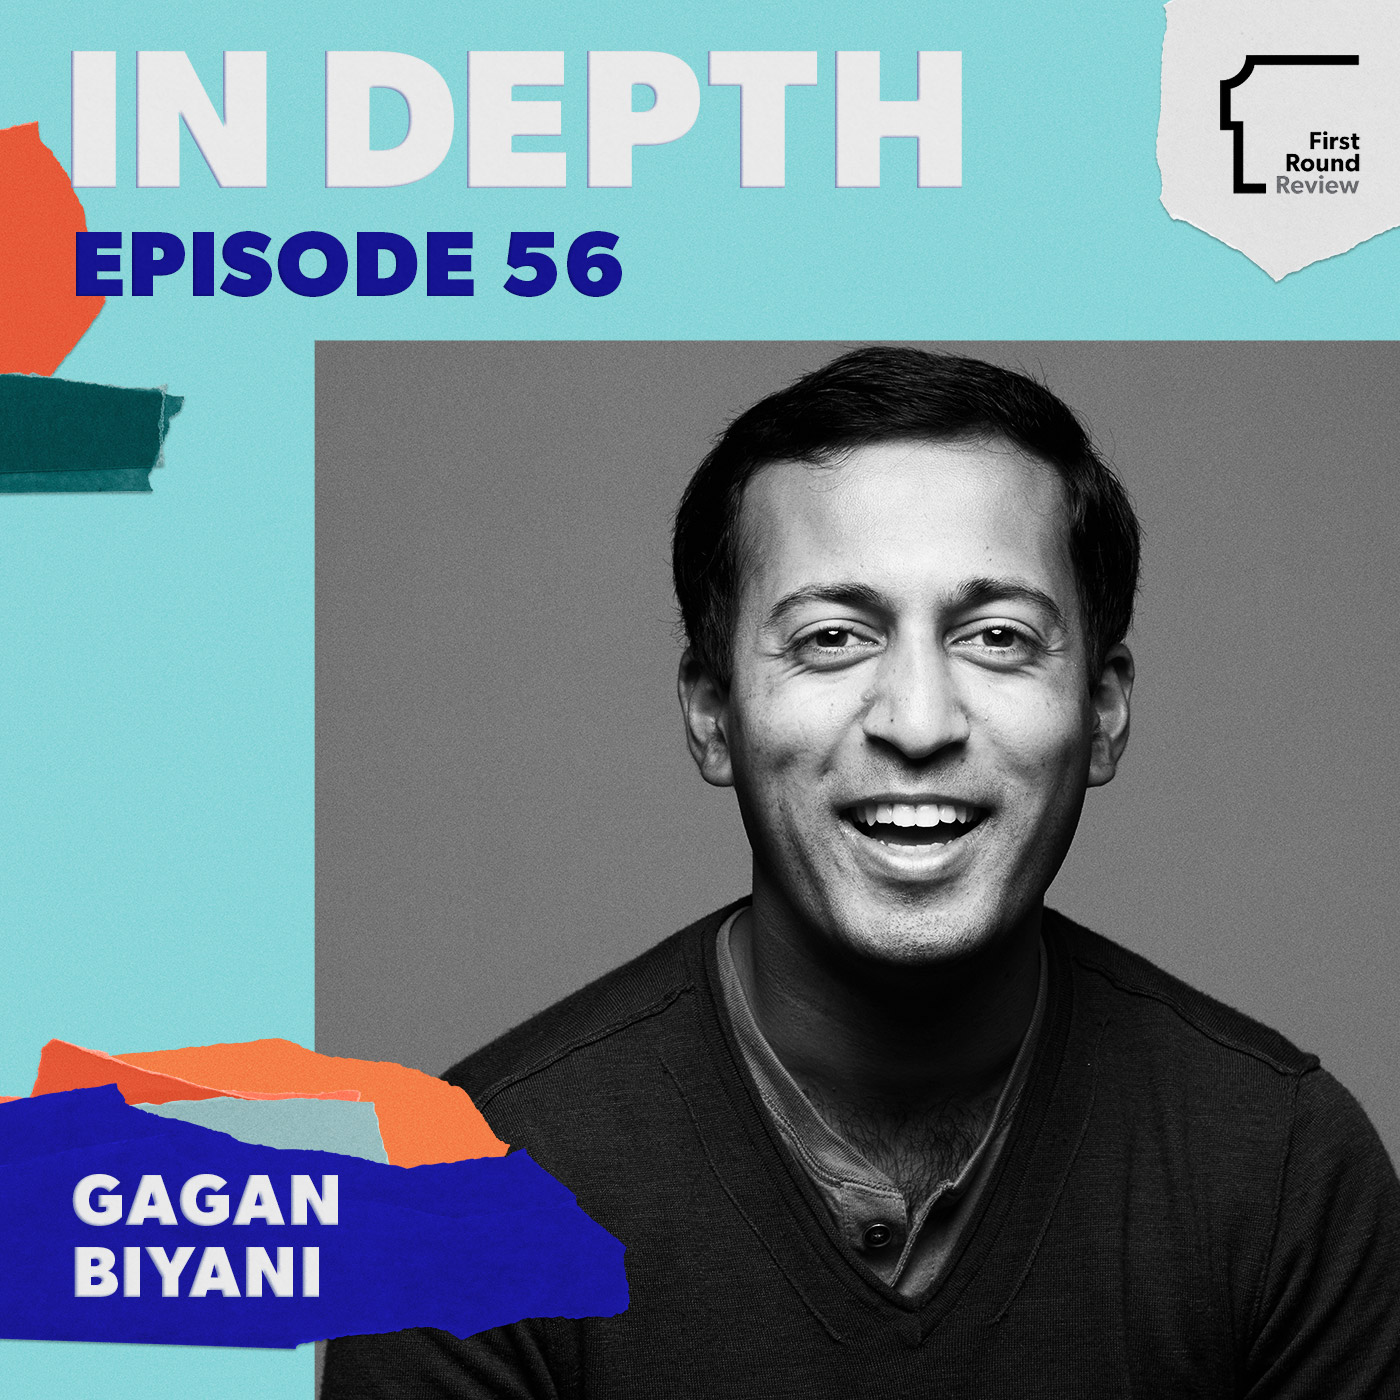 The art of starting a startup — Gagan Biyani’s advice for generating, validating, and executing on ideas